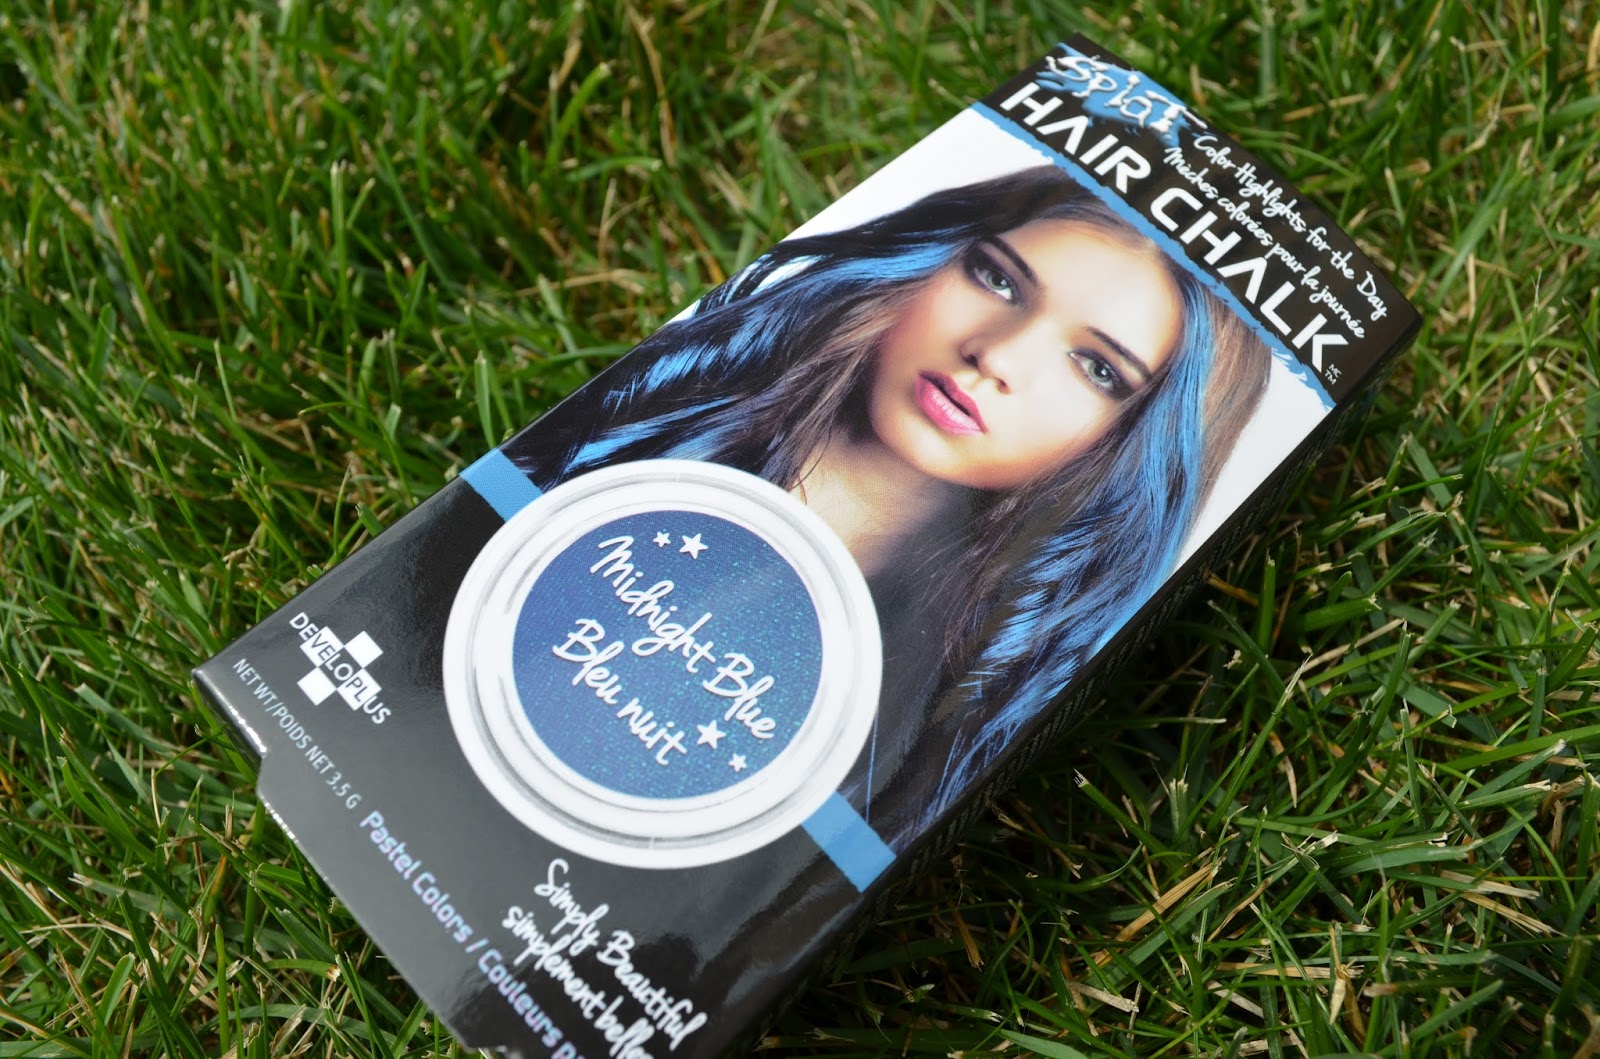 Splat Hair Dye Blue Envy
2. Splat Hair Dye Blue Envy Review - wide 4